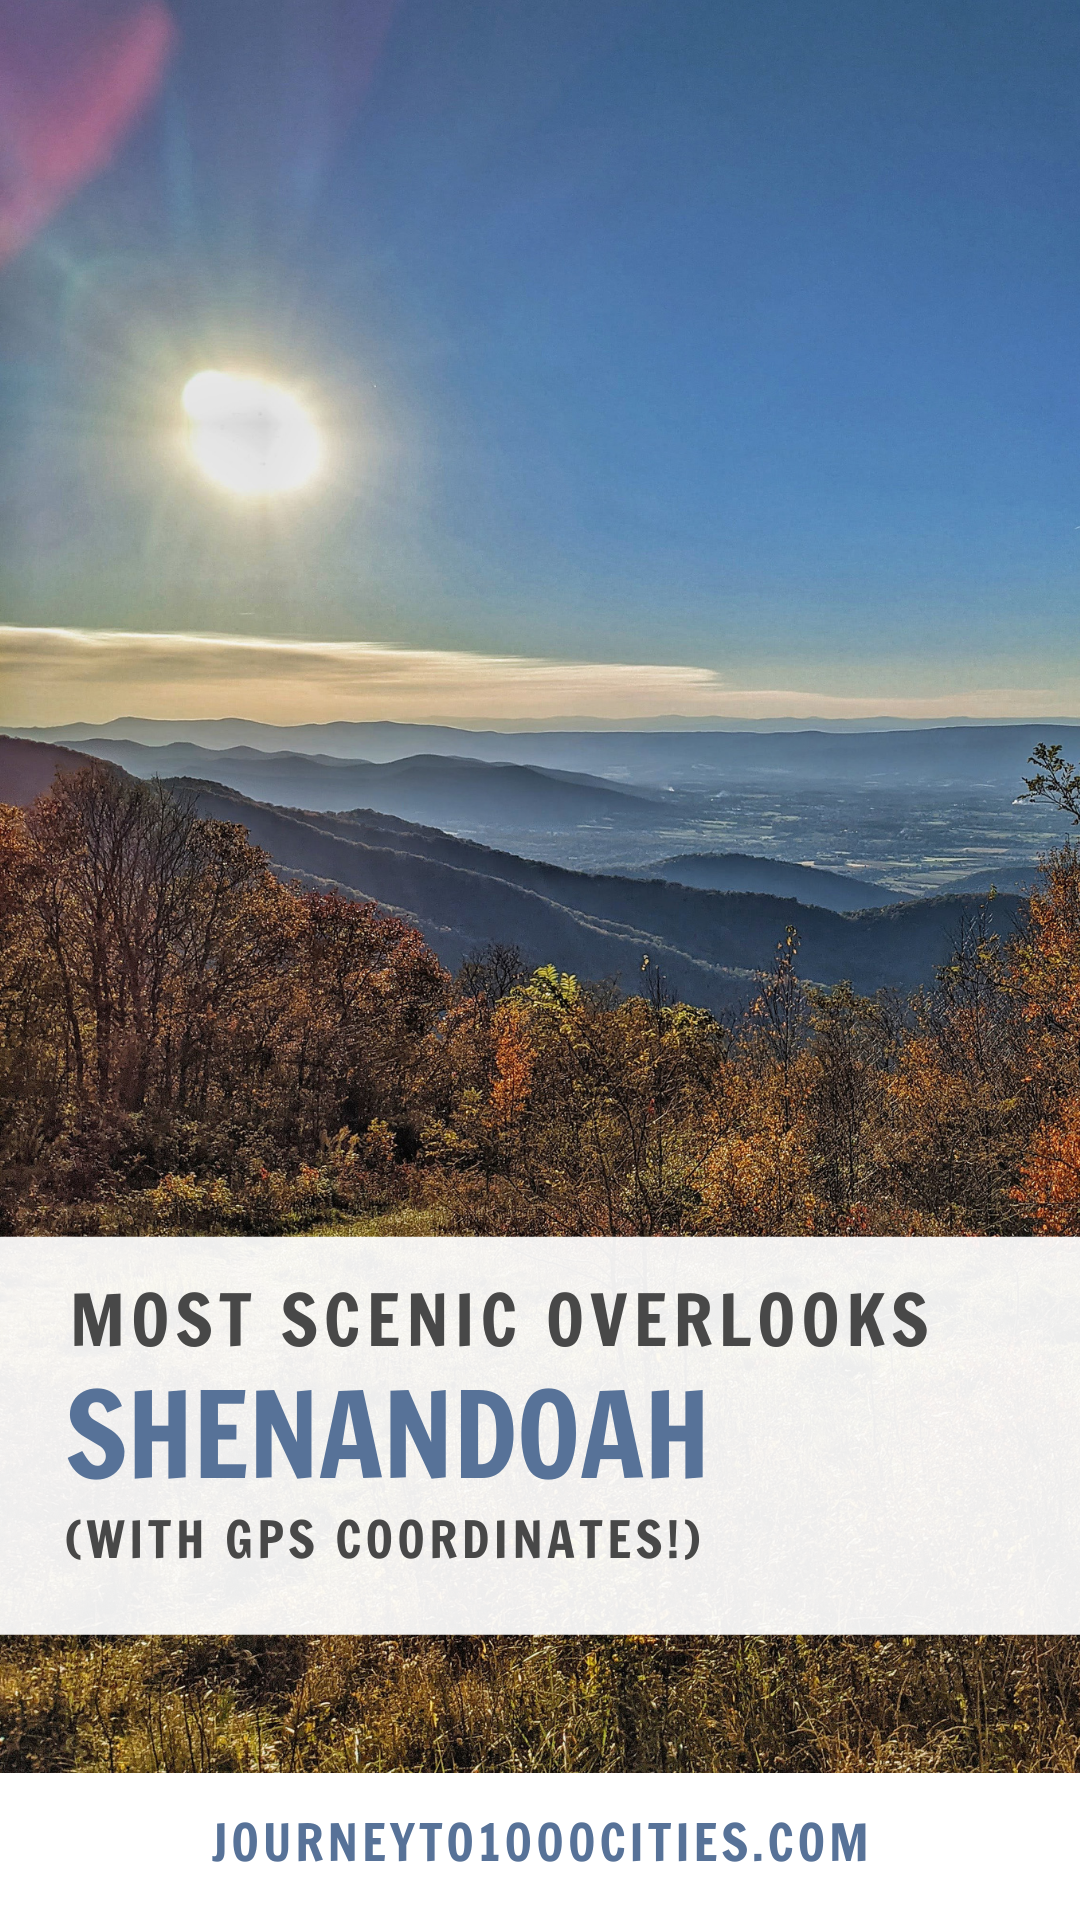 Most Instagrammable Spots and Overlooks in Shenandoah National Park